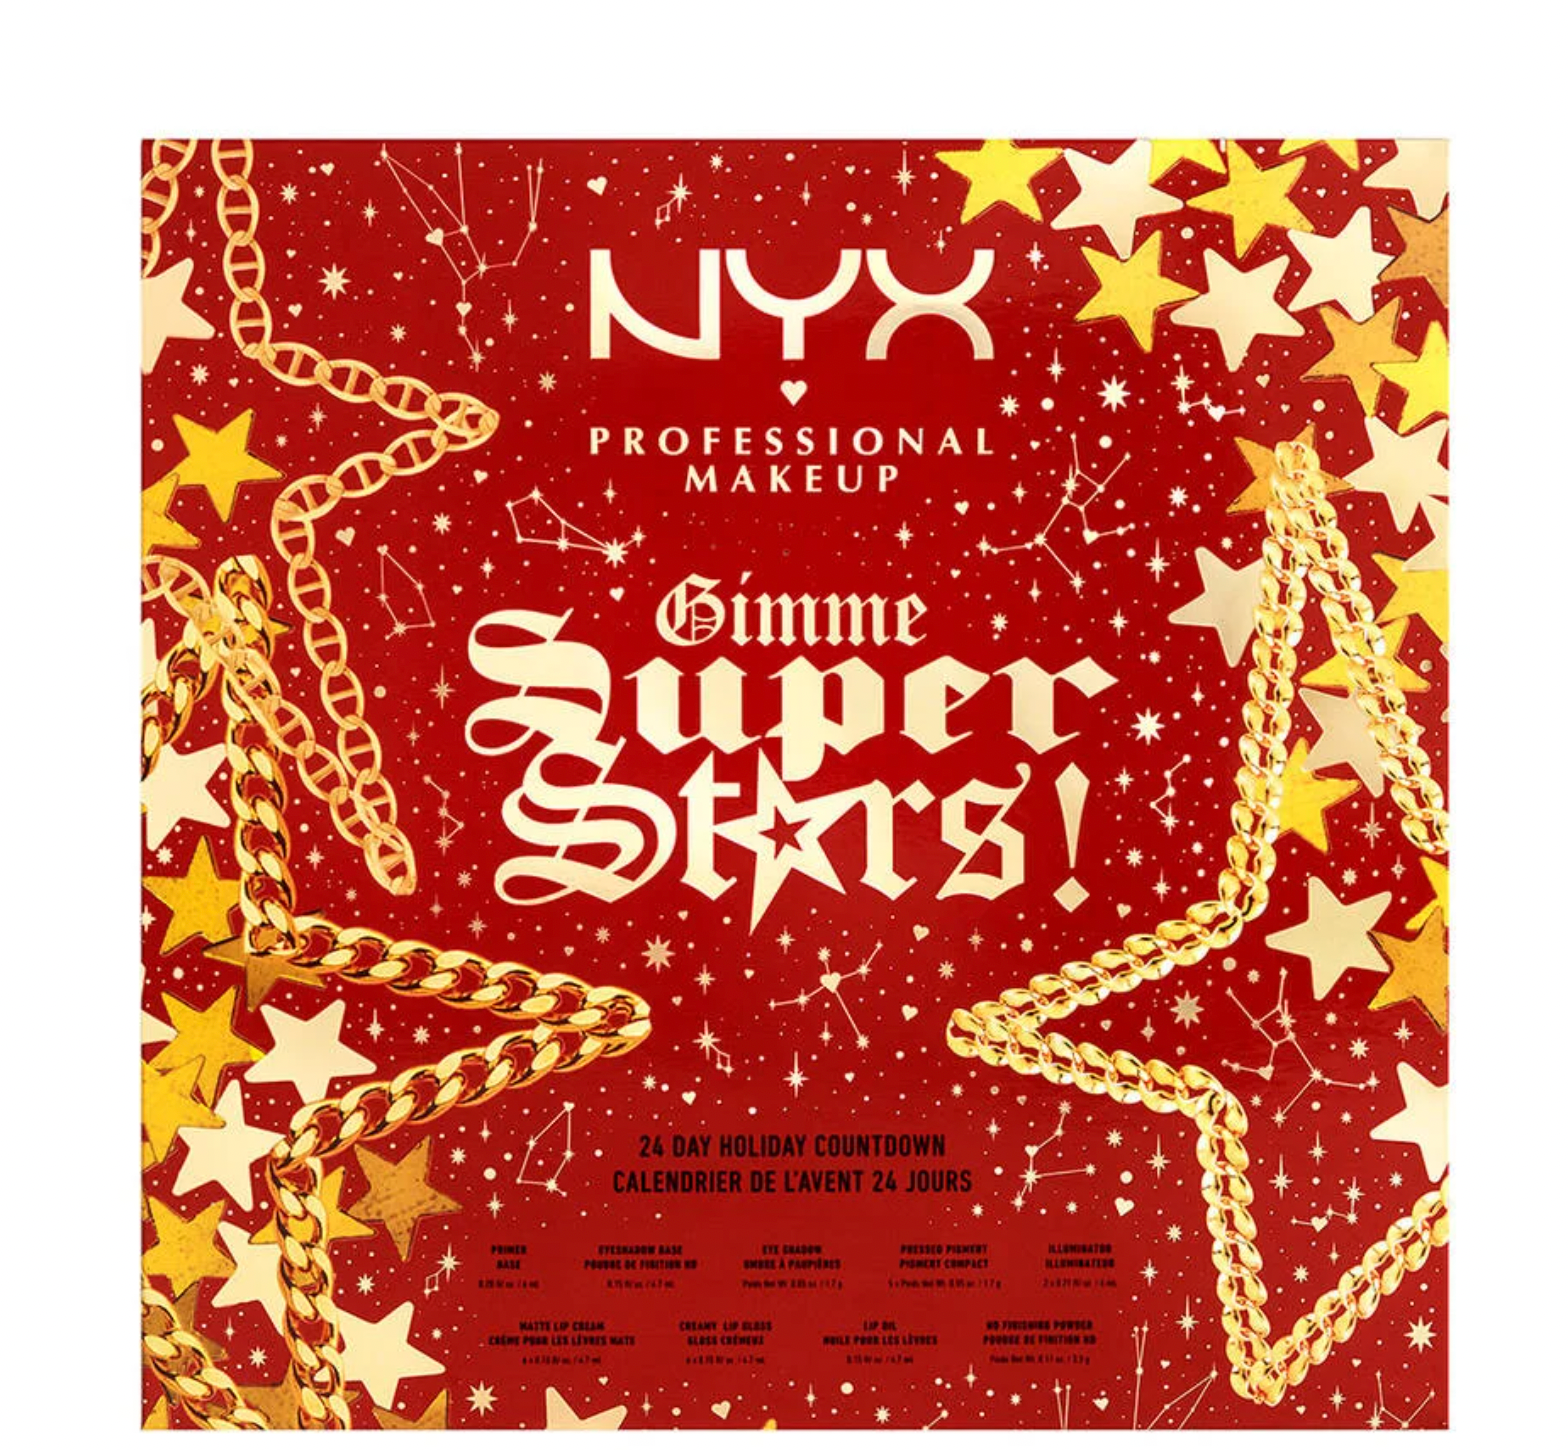 NYX Gimme Super Stars! 24 Day Holiday Countdown Advent Calendar